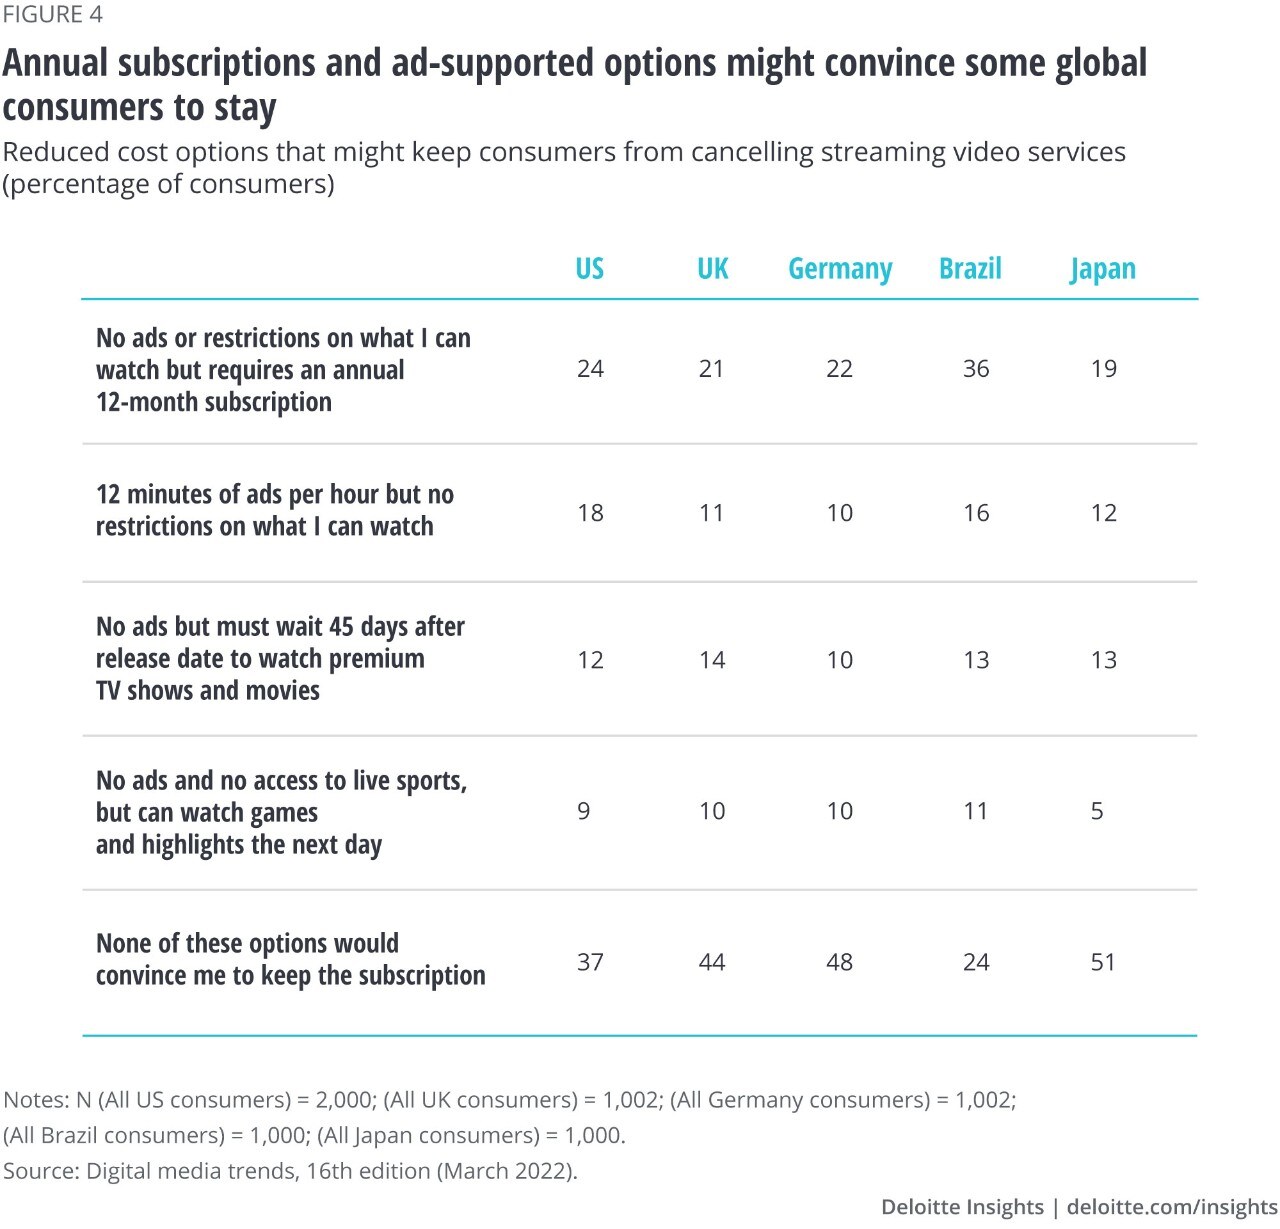 Figure 4. A lower-cost annual subscription or ad-supported option might convince some global subscribers to stay